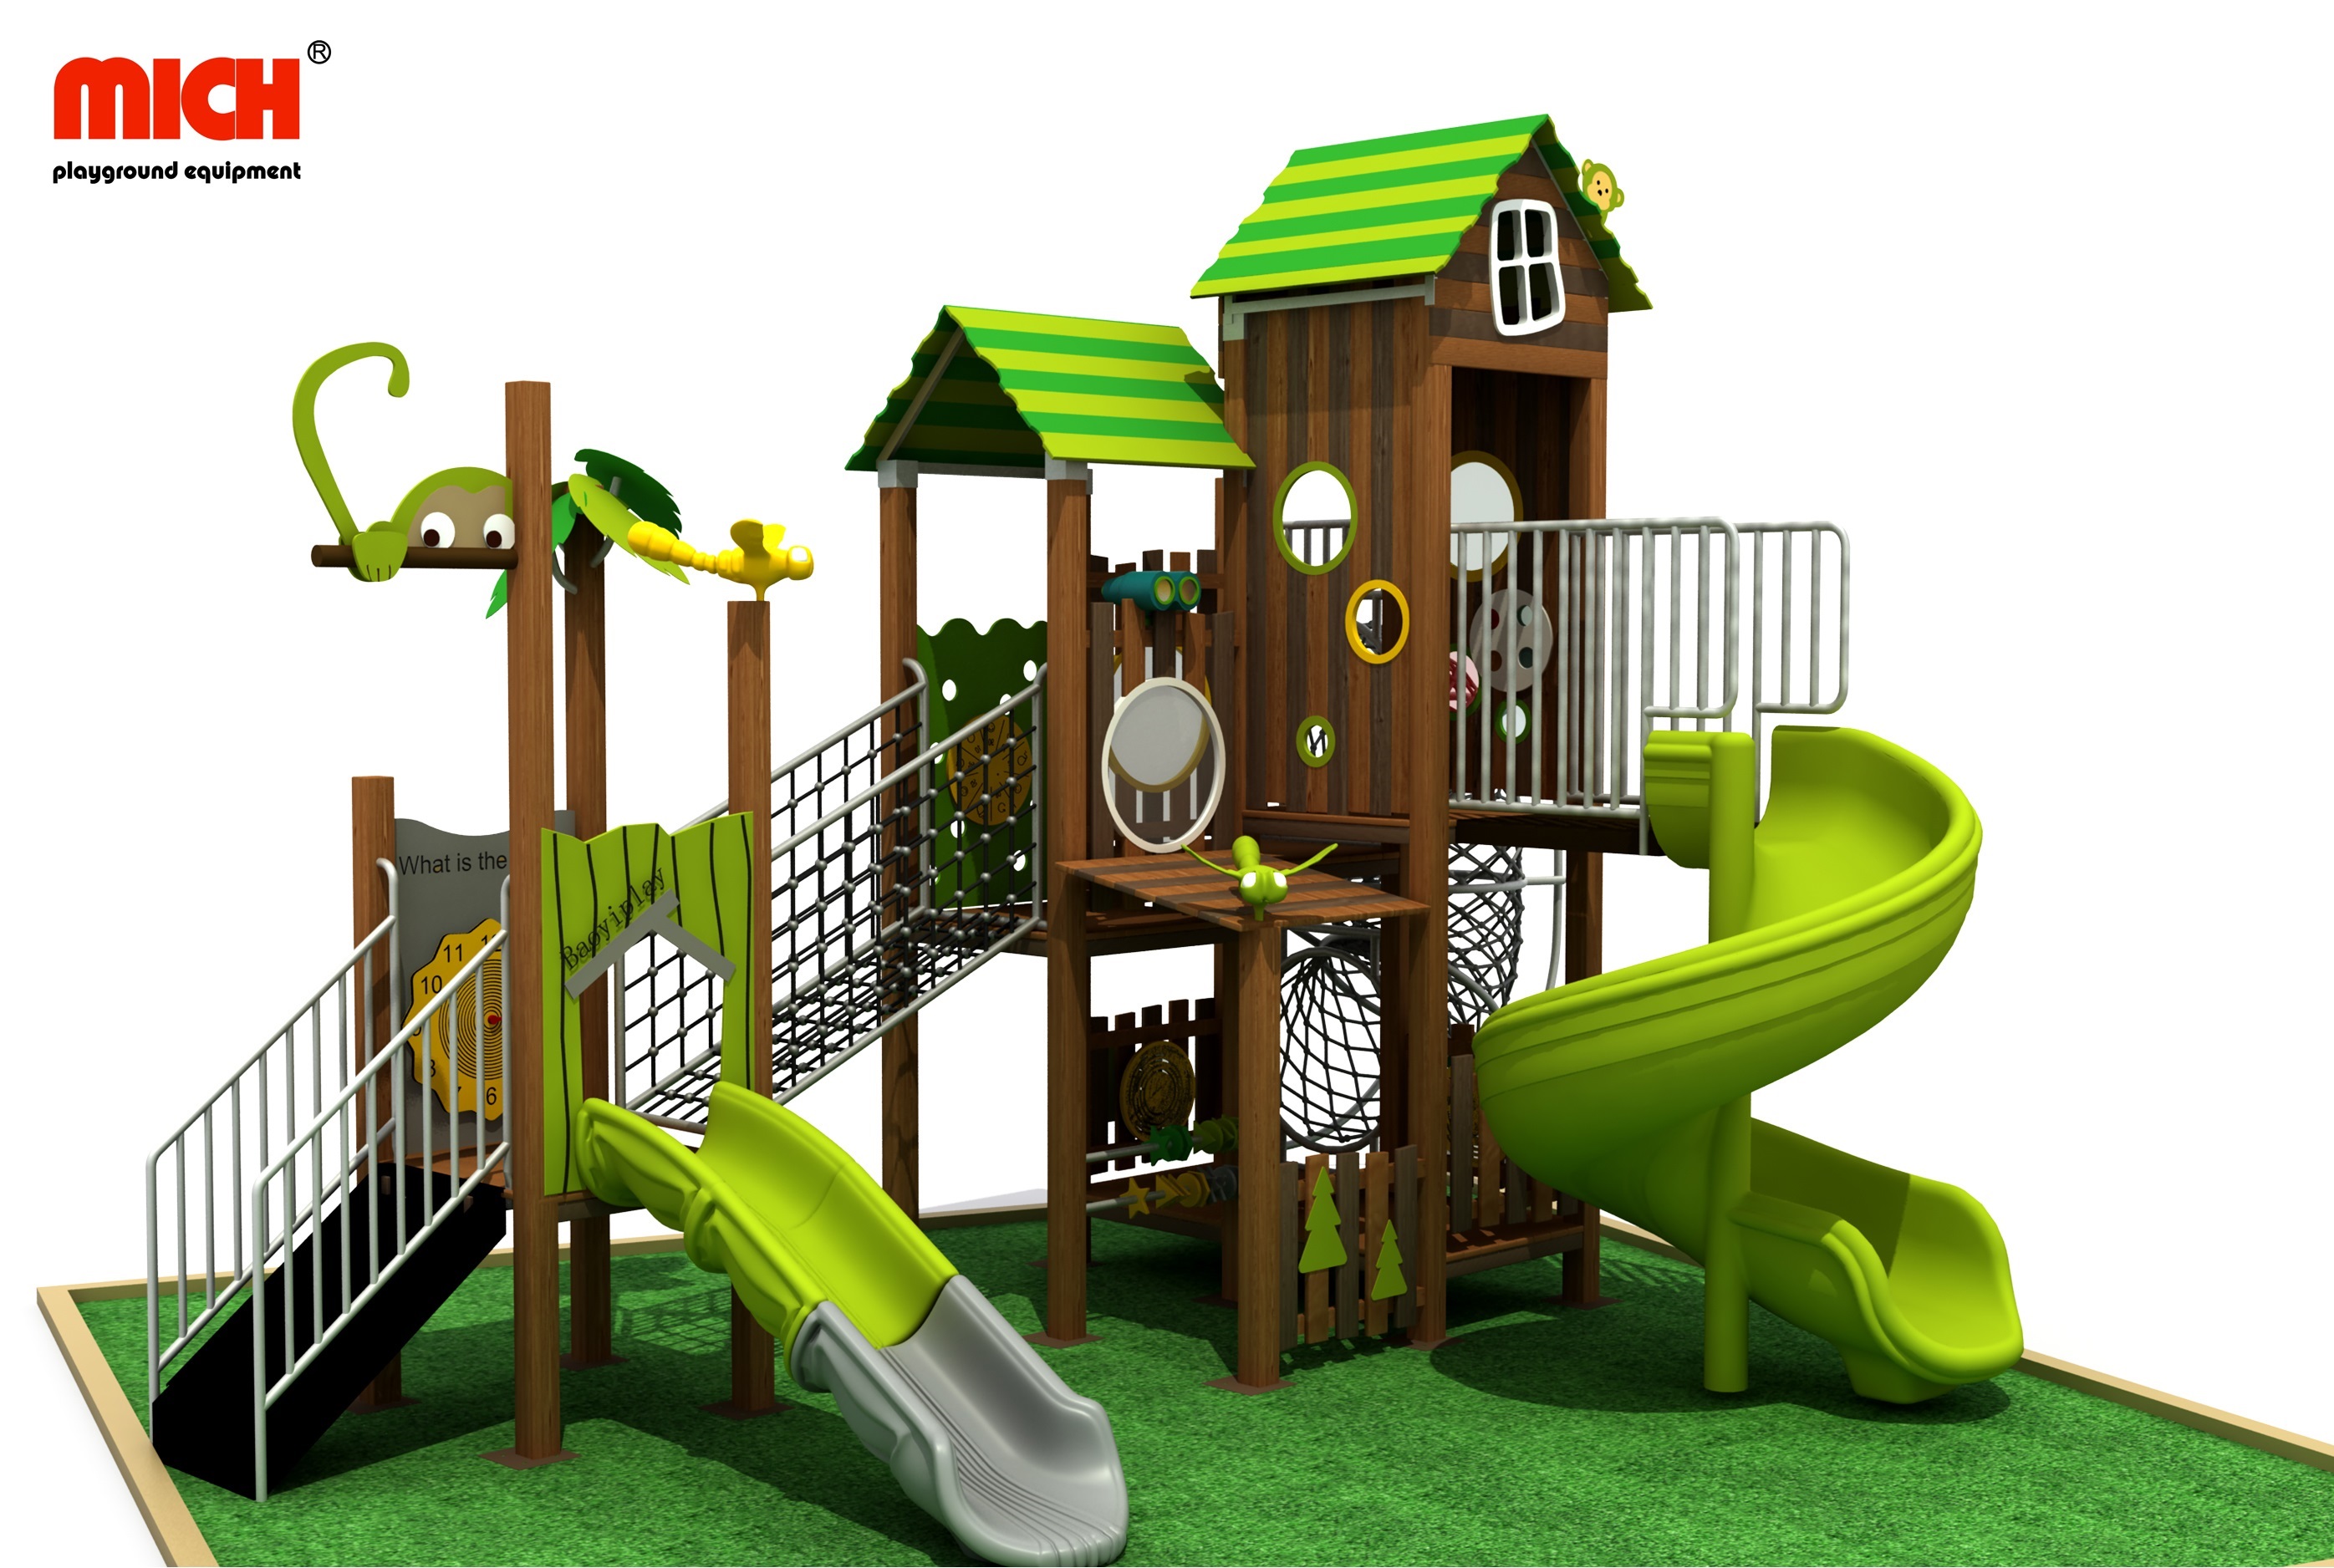 What's so good about non-standard custom playgrounds?